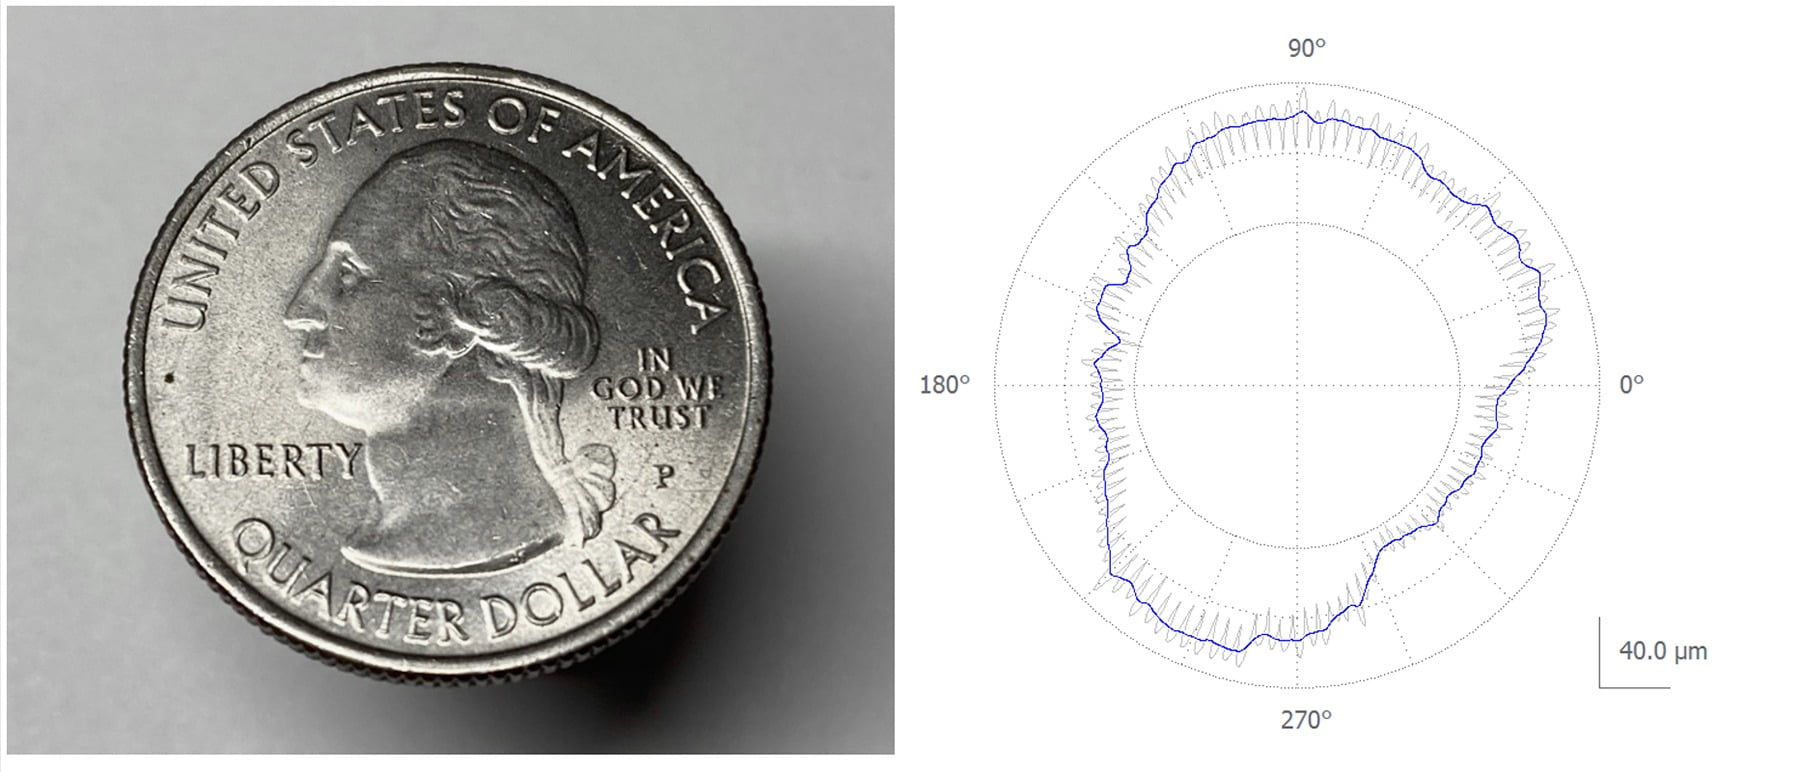 Figure 4. The 50 UPR filter shown in blue suppresses the serrations of a quarter.